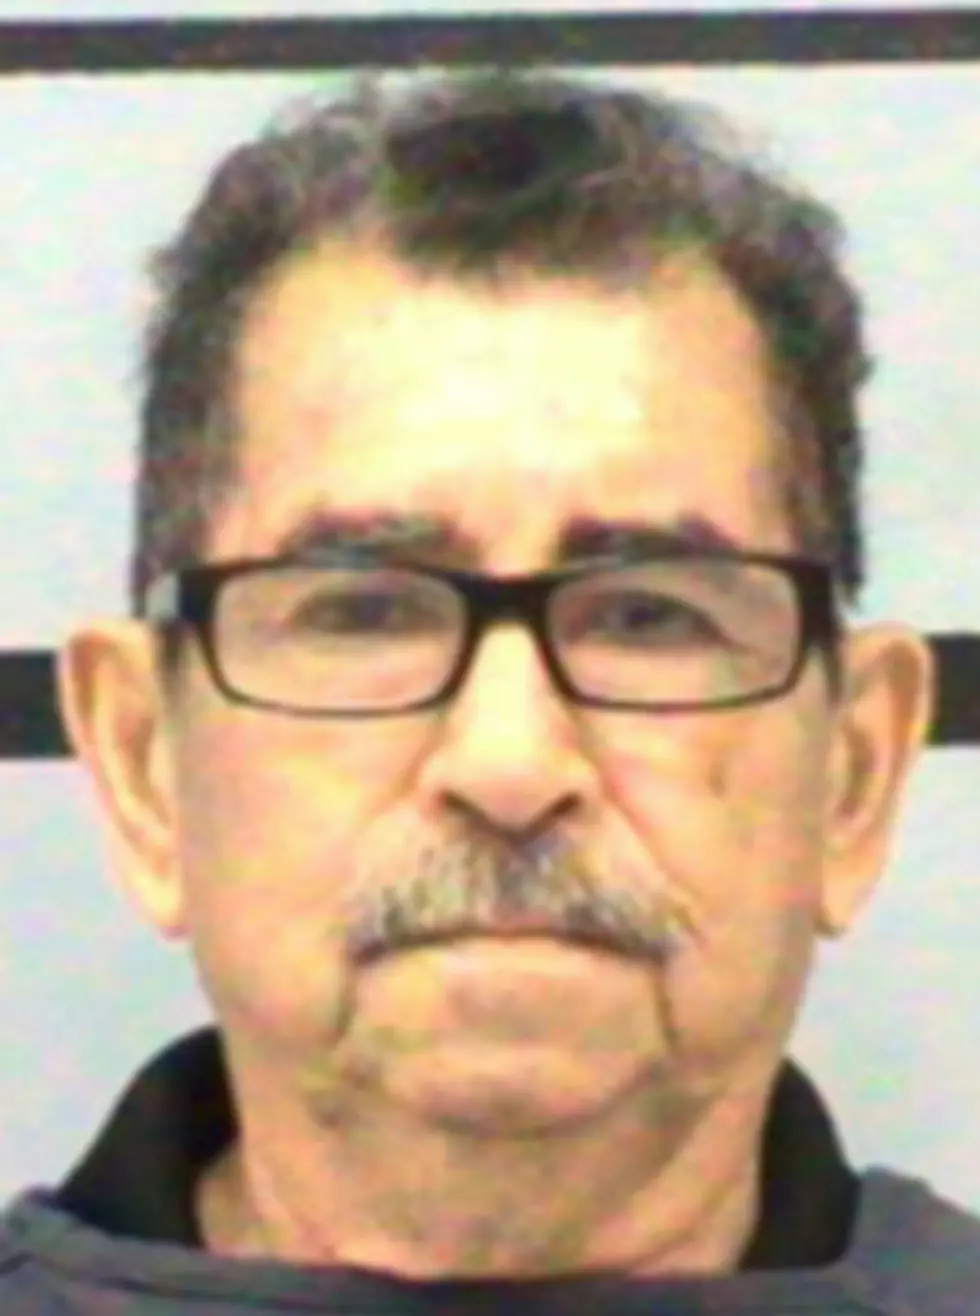 Lubbock Man Turns Self in for Sexual Abuse of Elderly Disabled Person